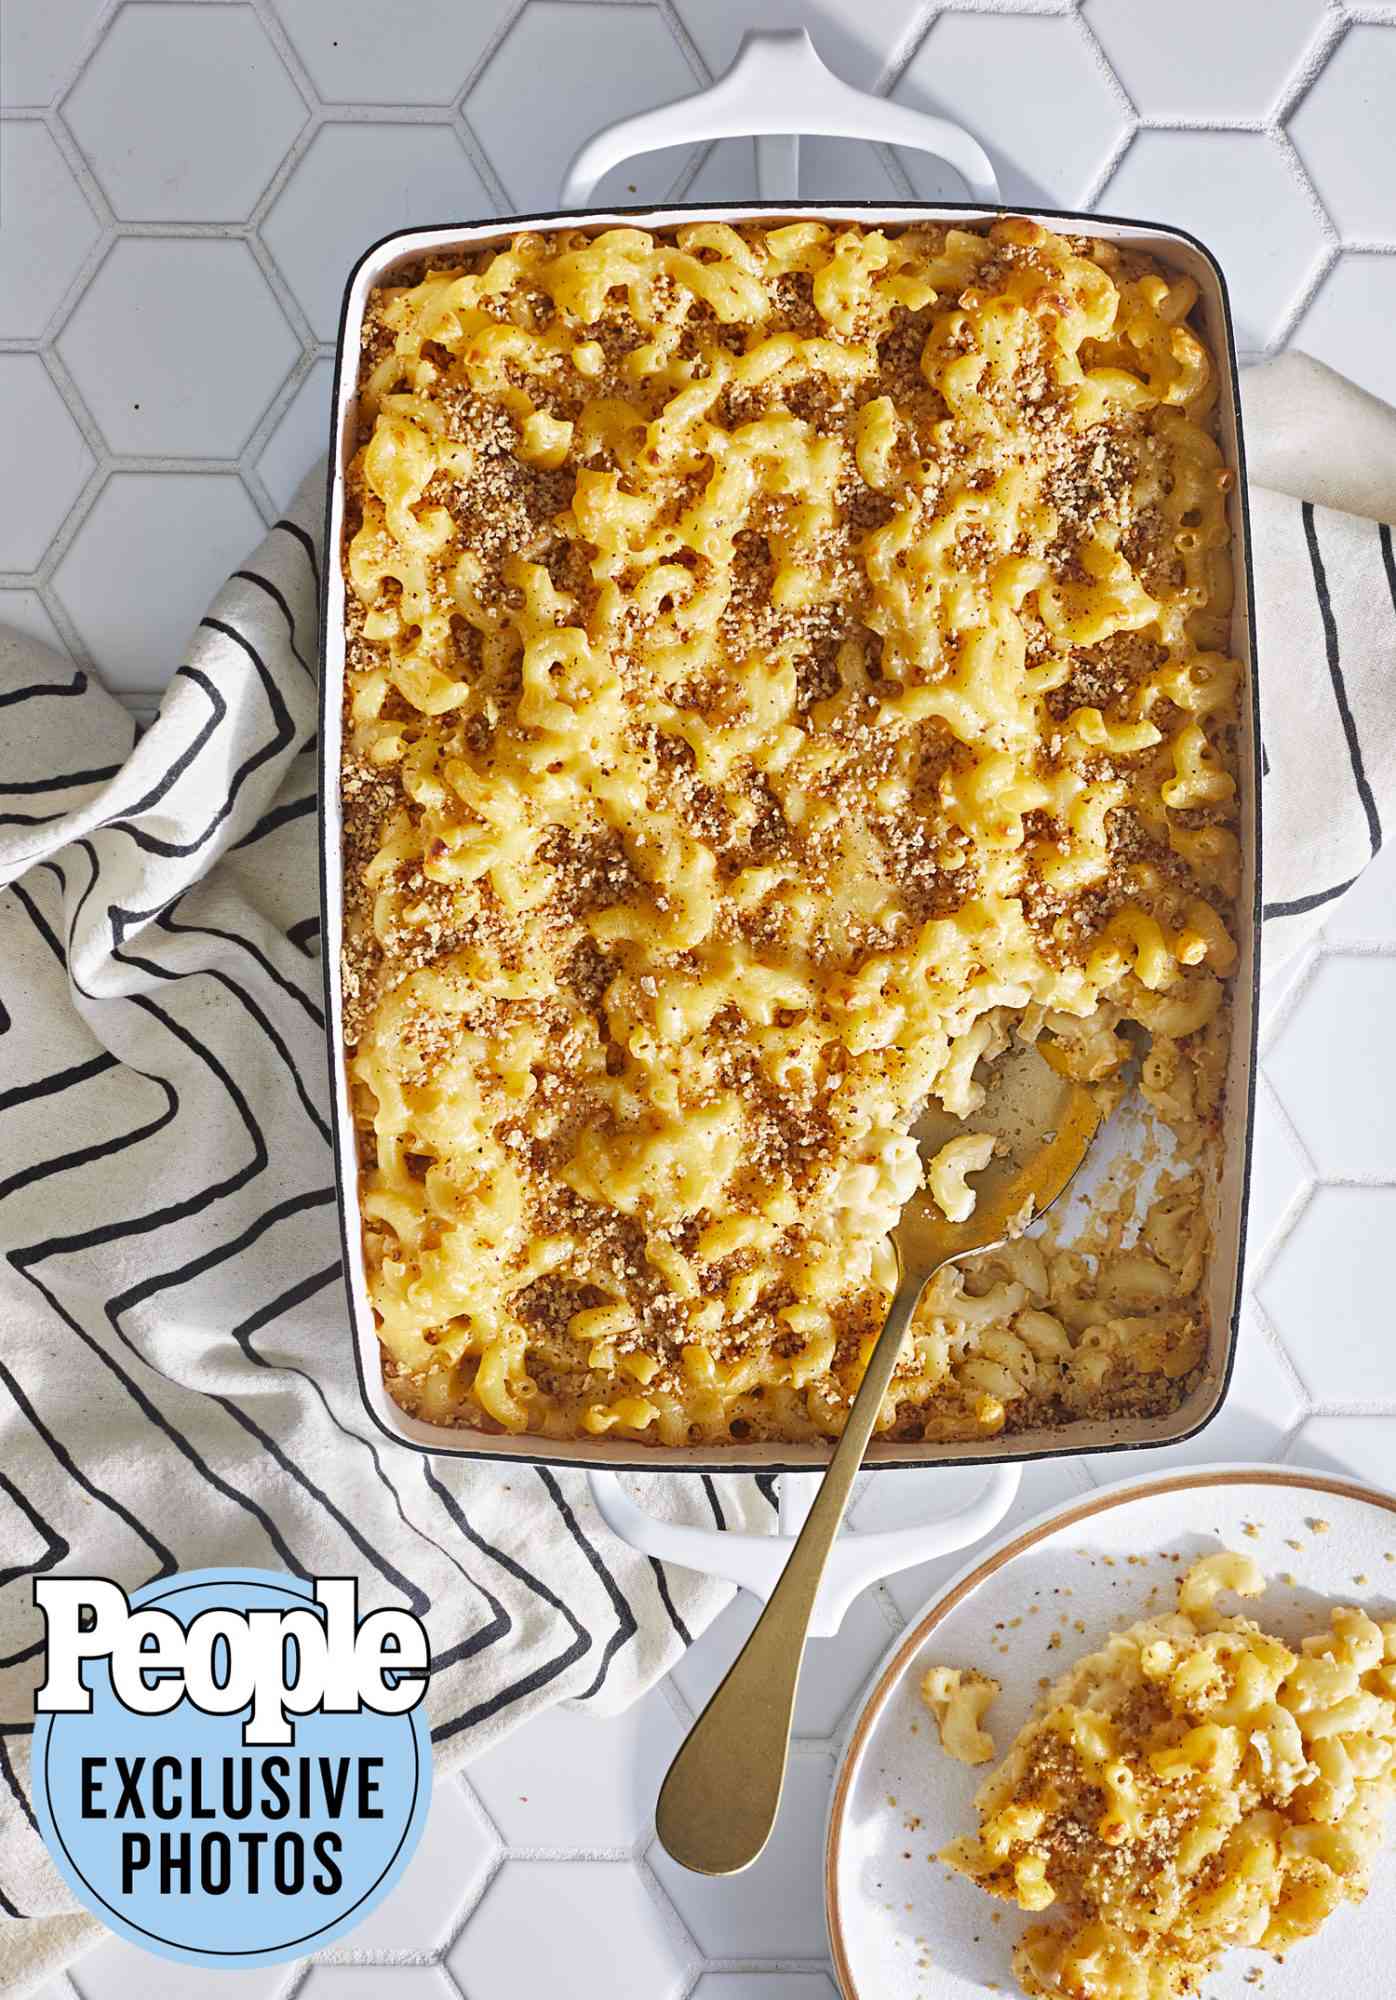 People Food- Canyon Ranch Baked Mac and Cheese